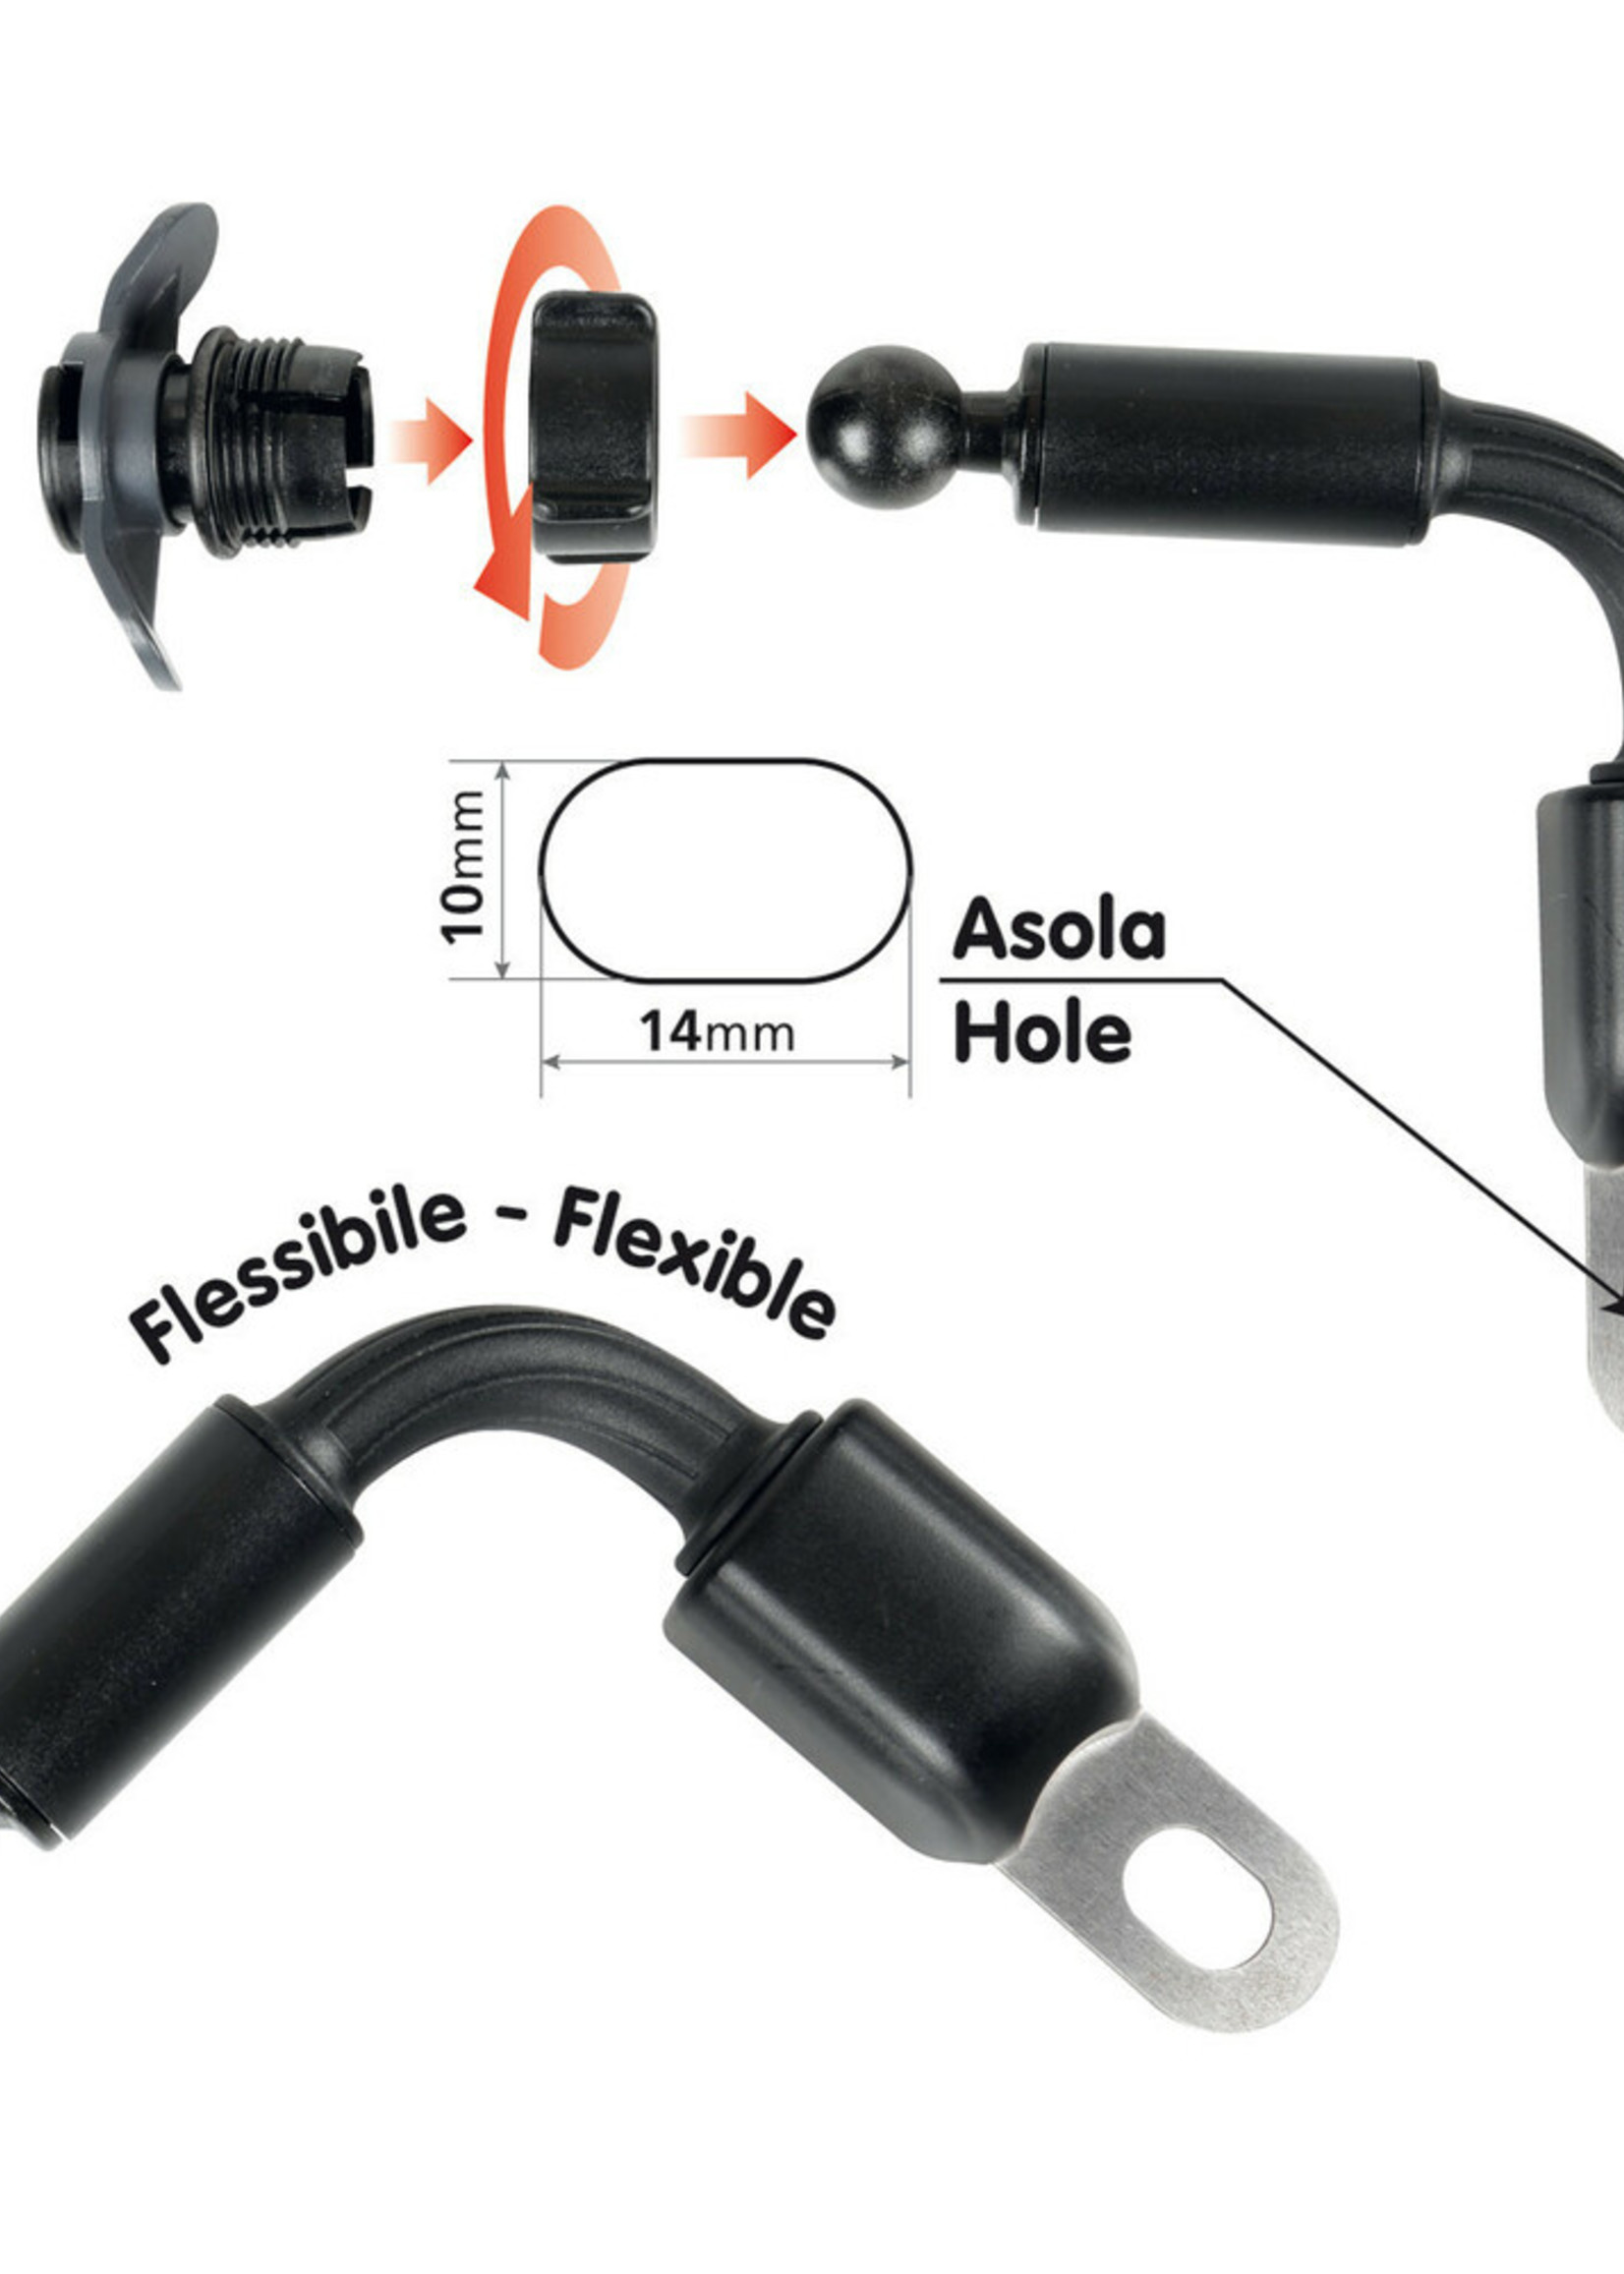 Optiline Arm, mirror and screw mount with flexible arm and hole